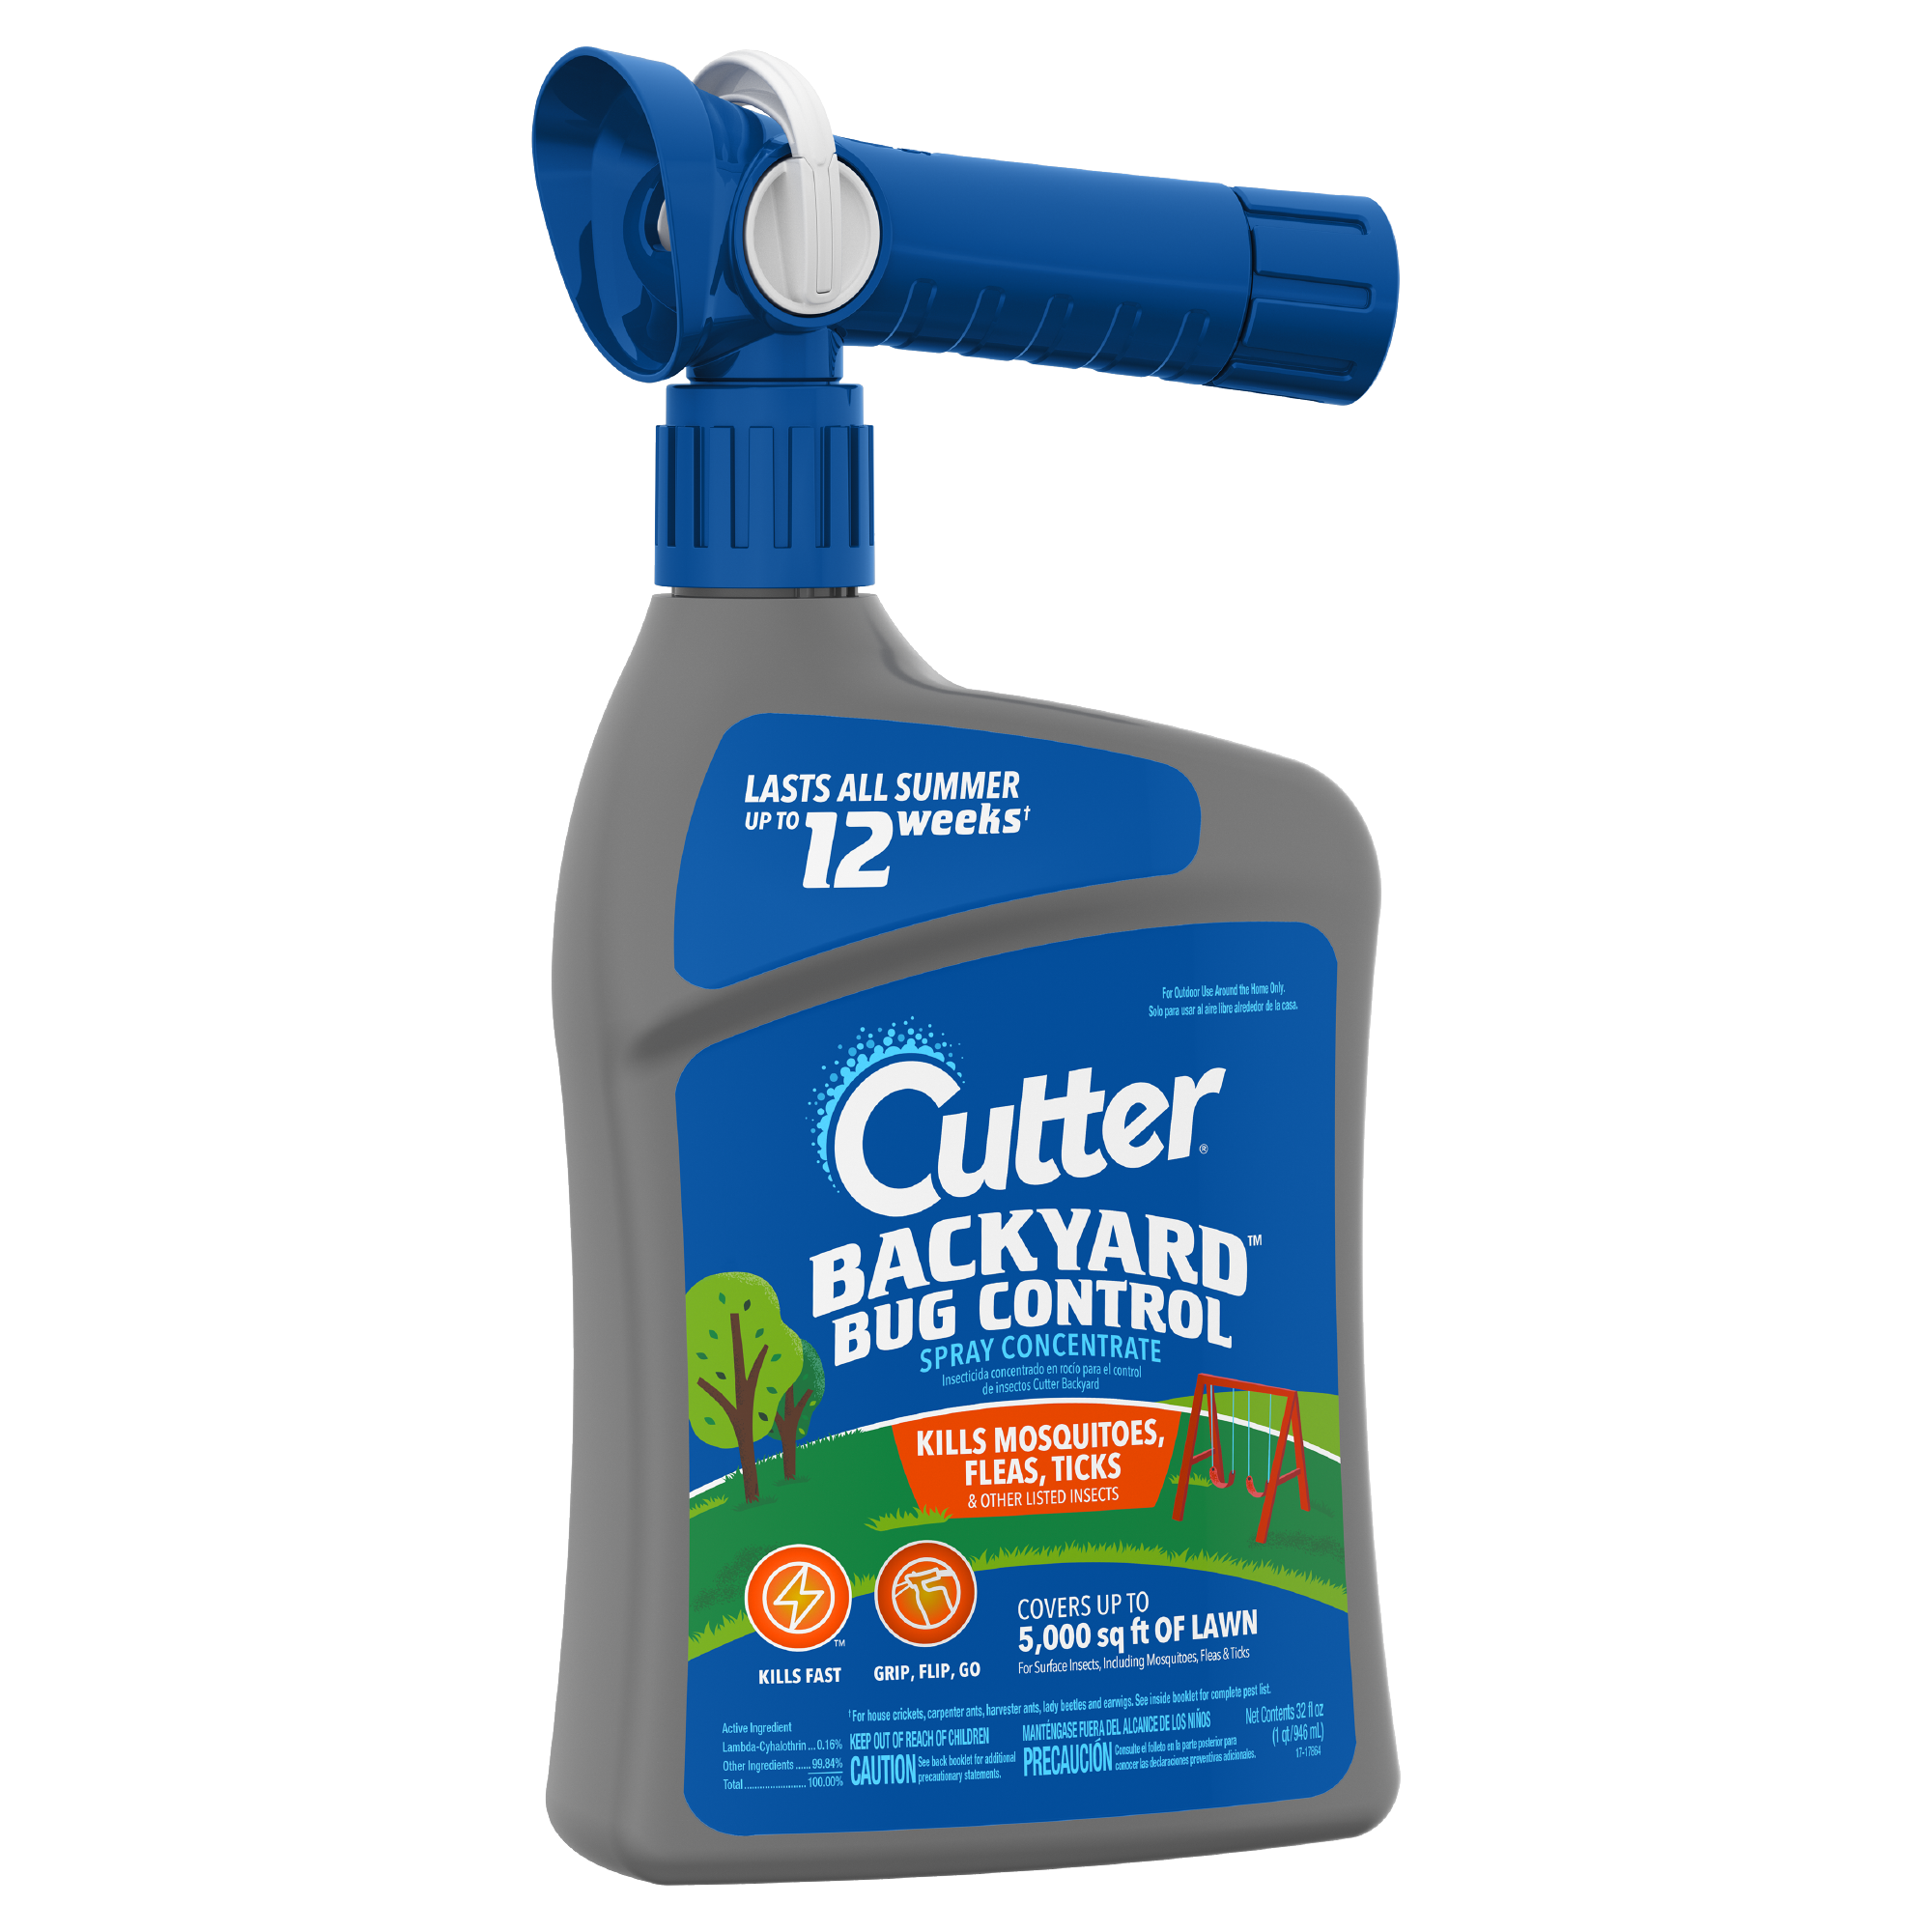 Cutter Backyard Bug Control Insecticide Concentrate with QuickFlip Hose-End Sprayer, 32 Ounces - image 3 of 11